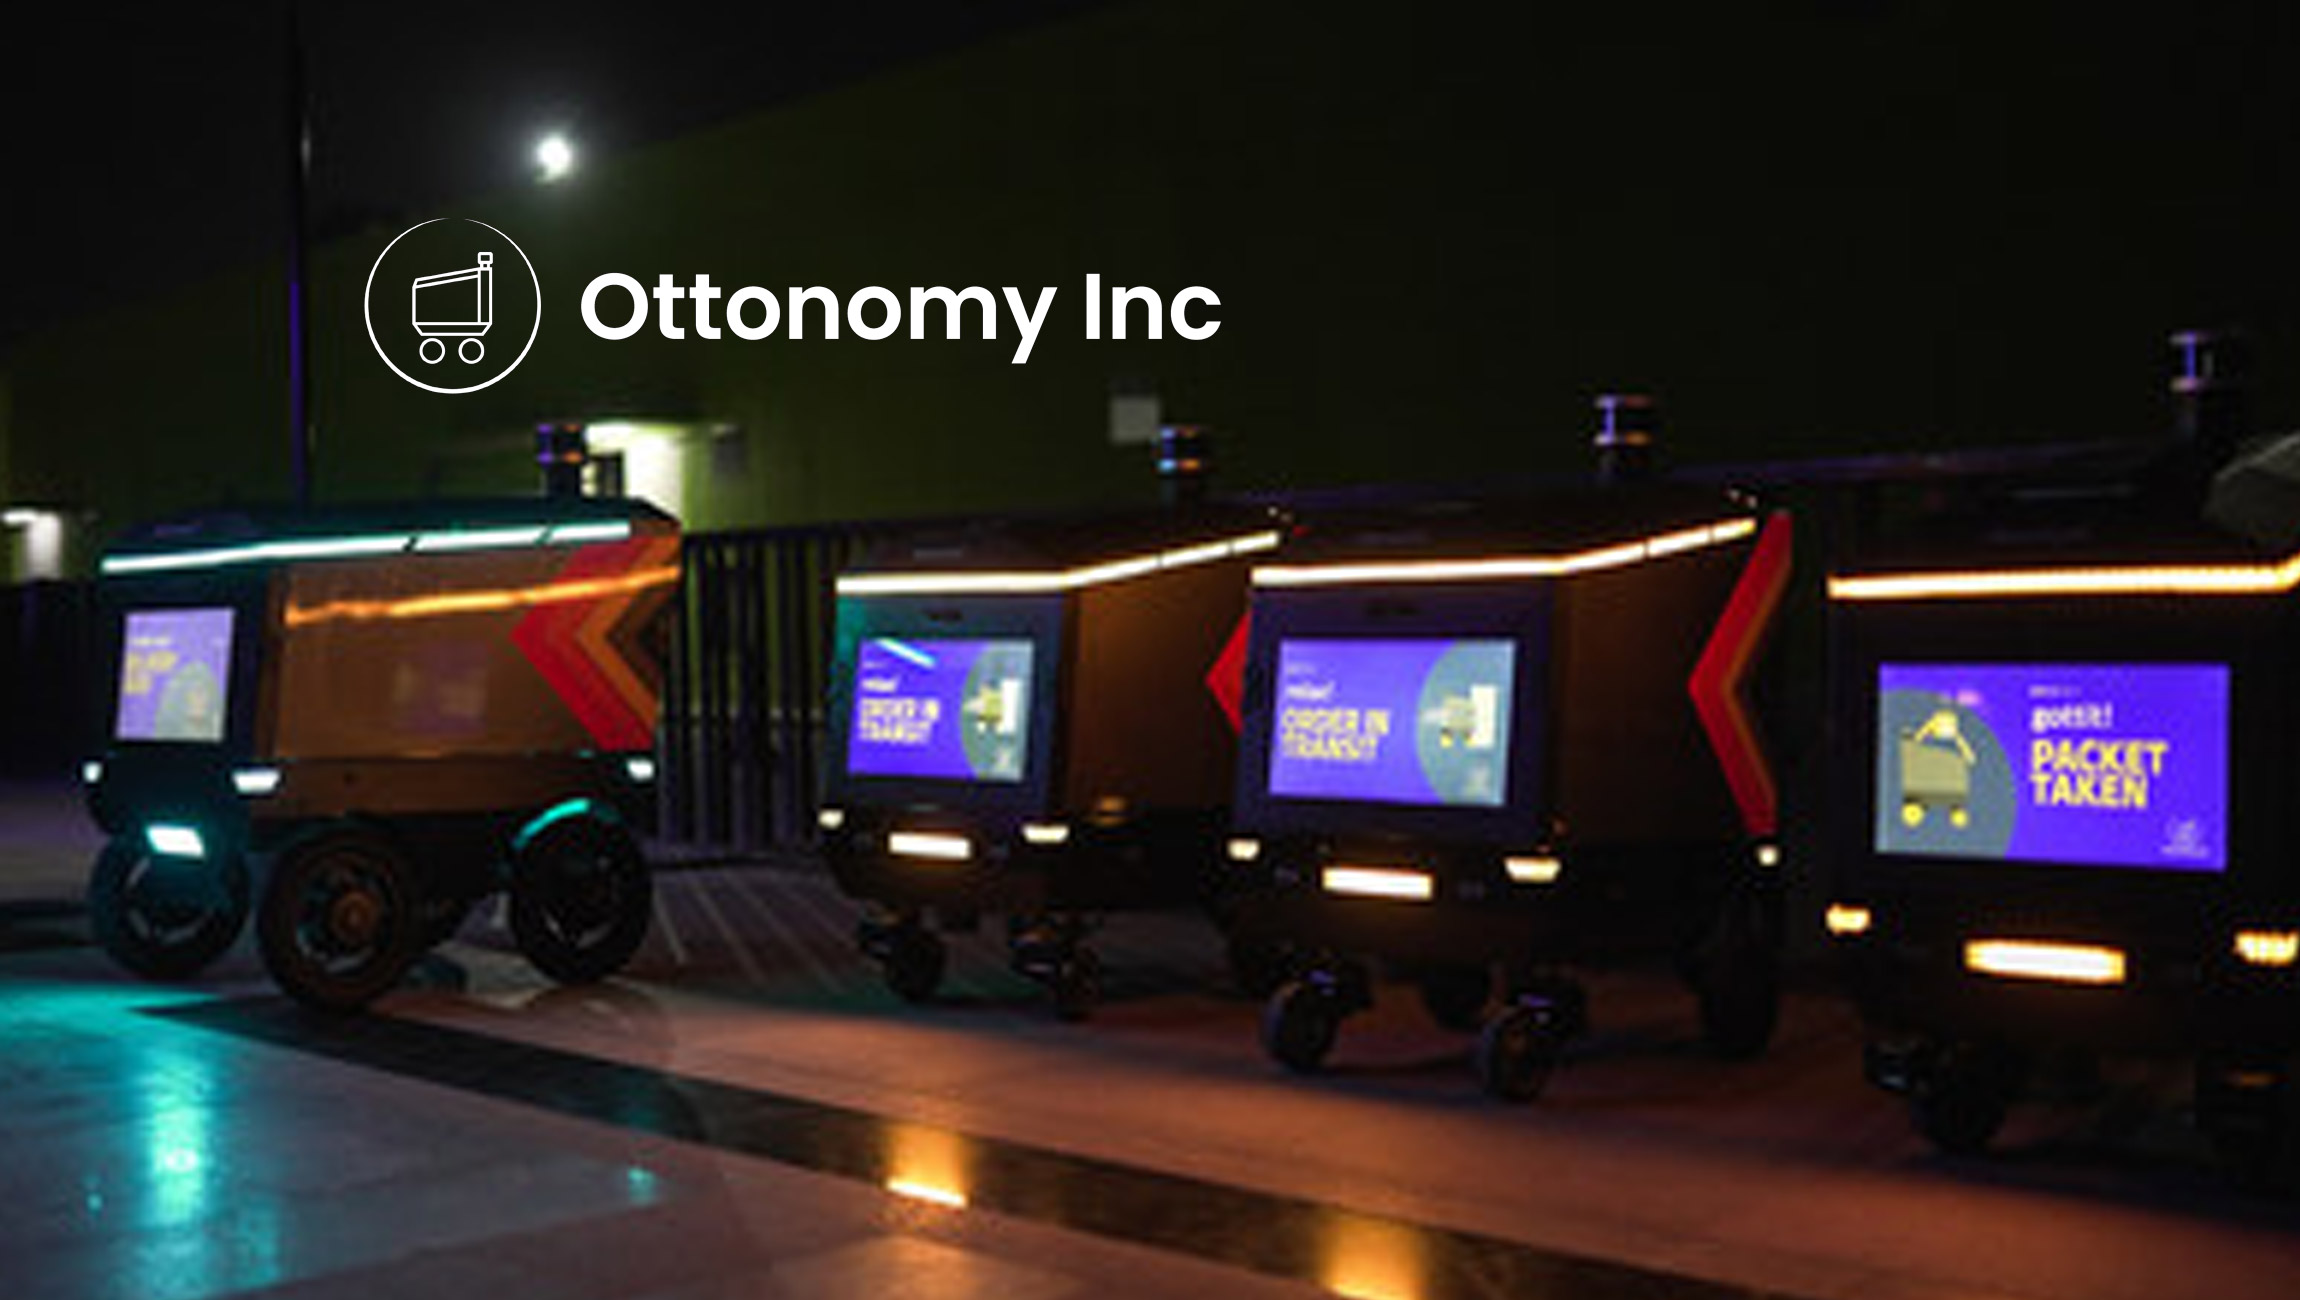 Ottonomy-UnFeatured in 'Retail's Big Show' NRF Innovation Lab, Ottonomy Addresses the Need for Sustainability in Retail with Autonomous Delivery Robotsveils-Ottobot;-The-World's-First-Fully-Autonomous-Delivery-Robot-Delivering-in-Both-Indoor-and-Outdoor-Environments